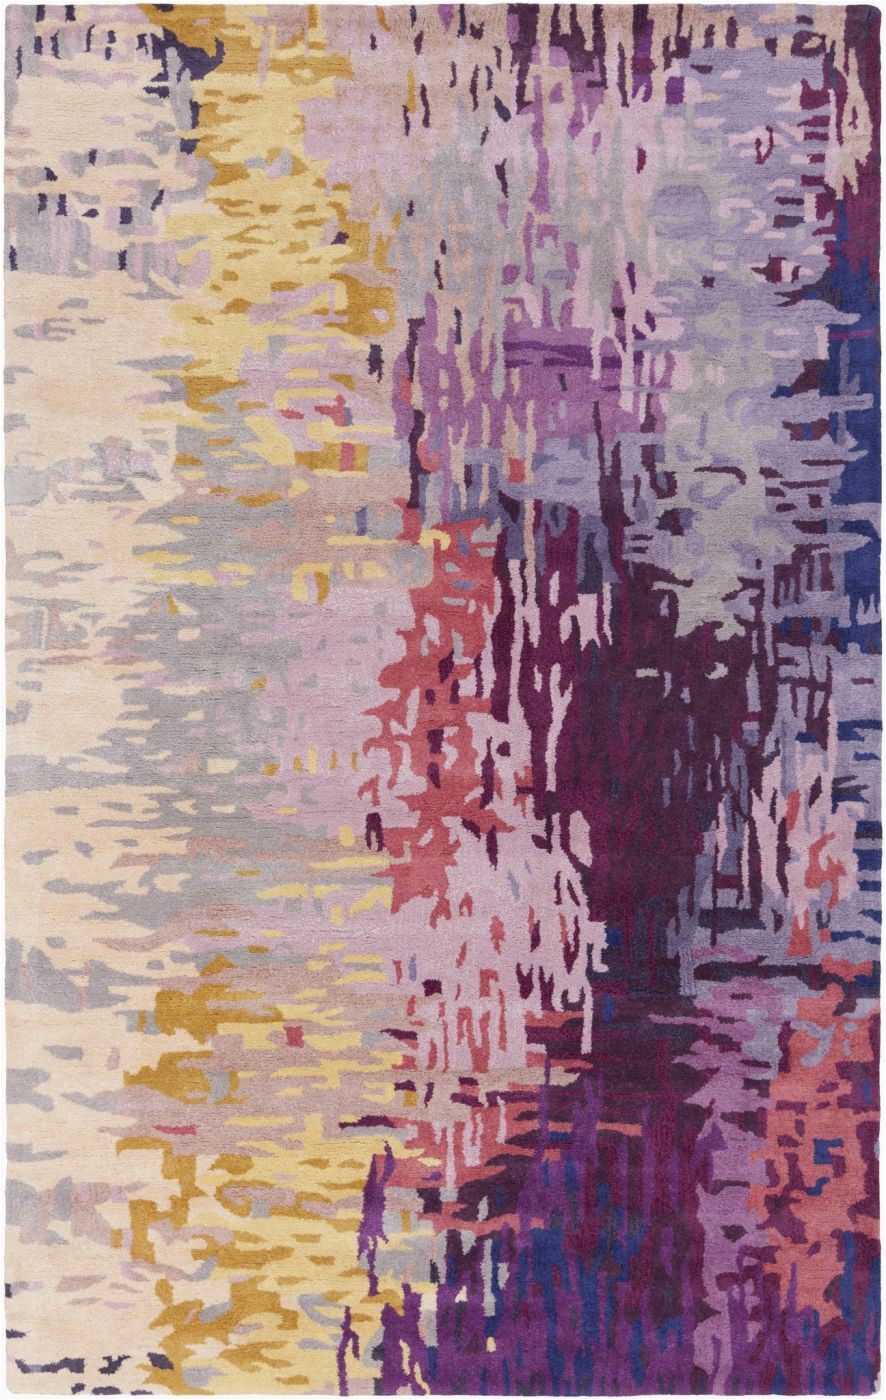 Purple and Yellow area Rug Surya Blowout Sale Up to Off Ban3344 23 Banshee area Rug Purple Yellow Only Ly $144 60 at Contemporary Furniture Warehouse